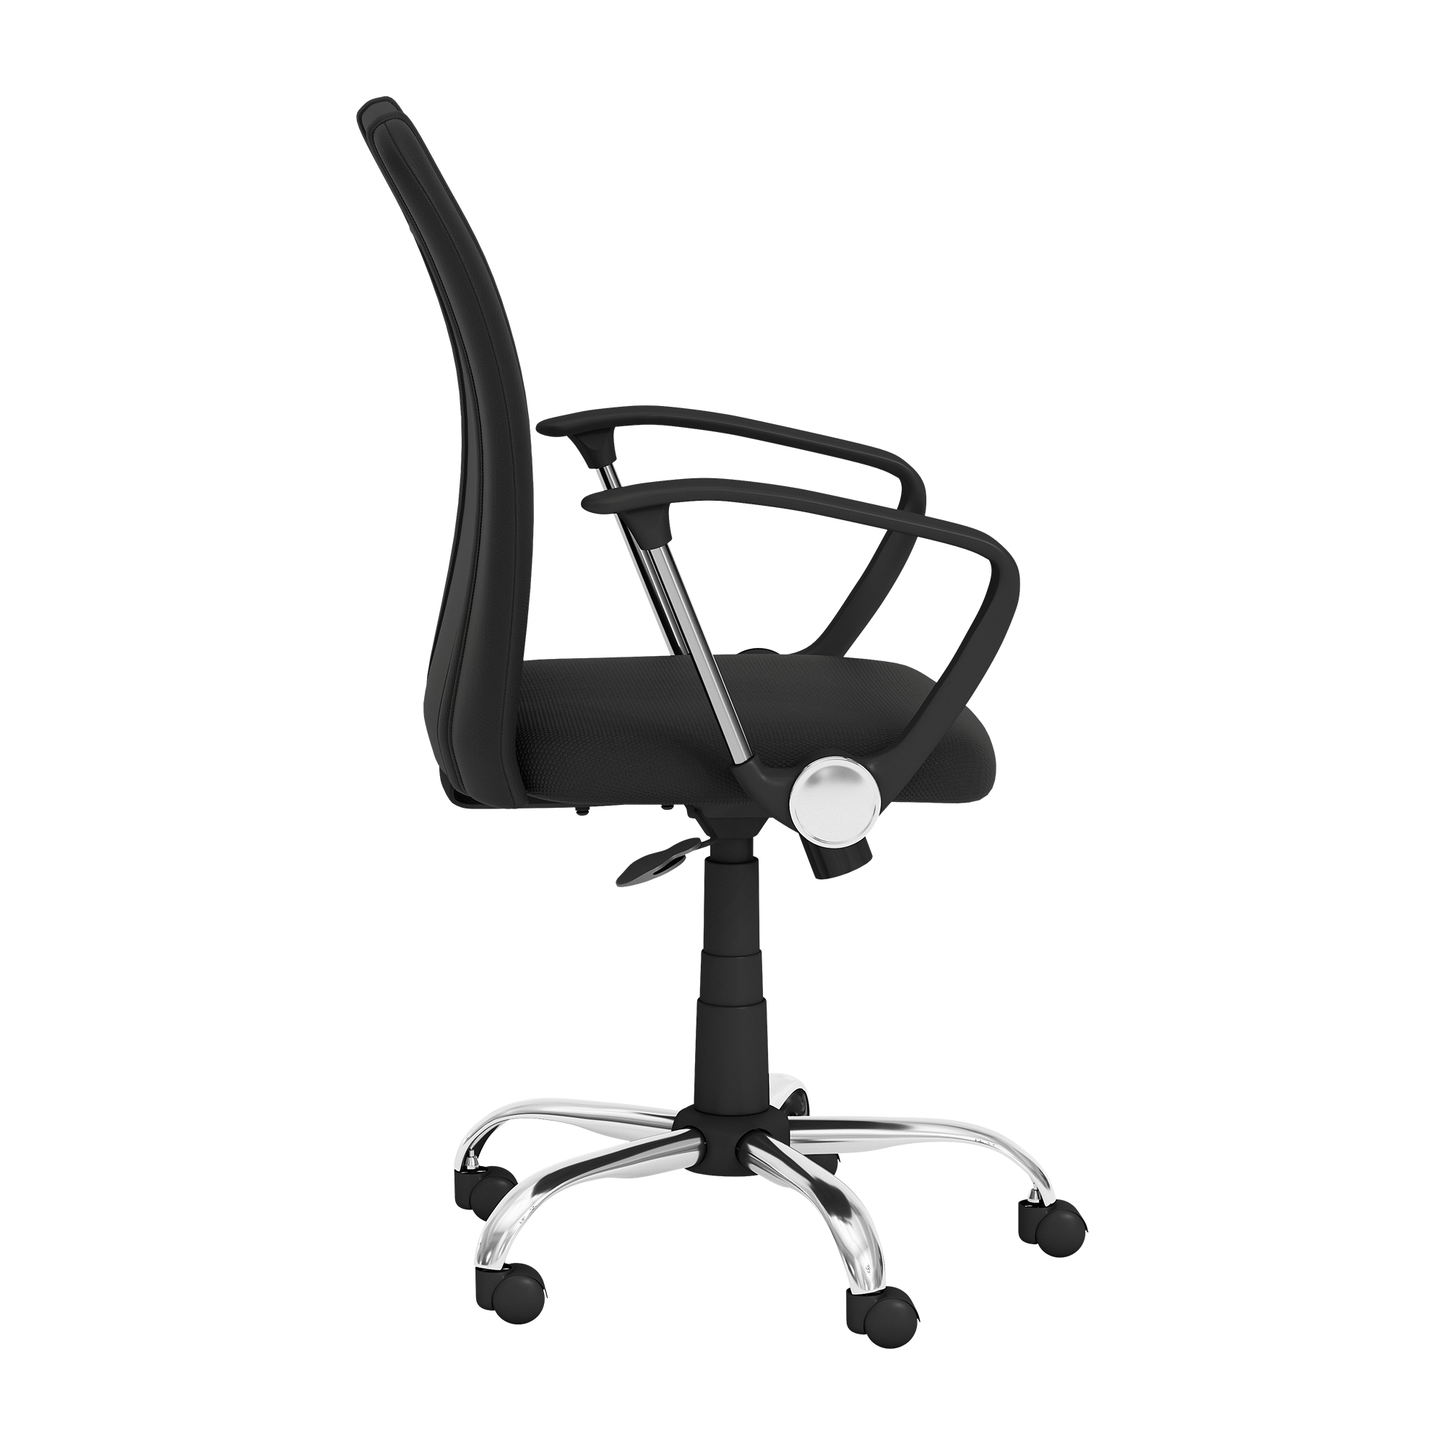 Curve Task Chair with Golden State Warriors Global Logo